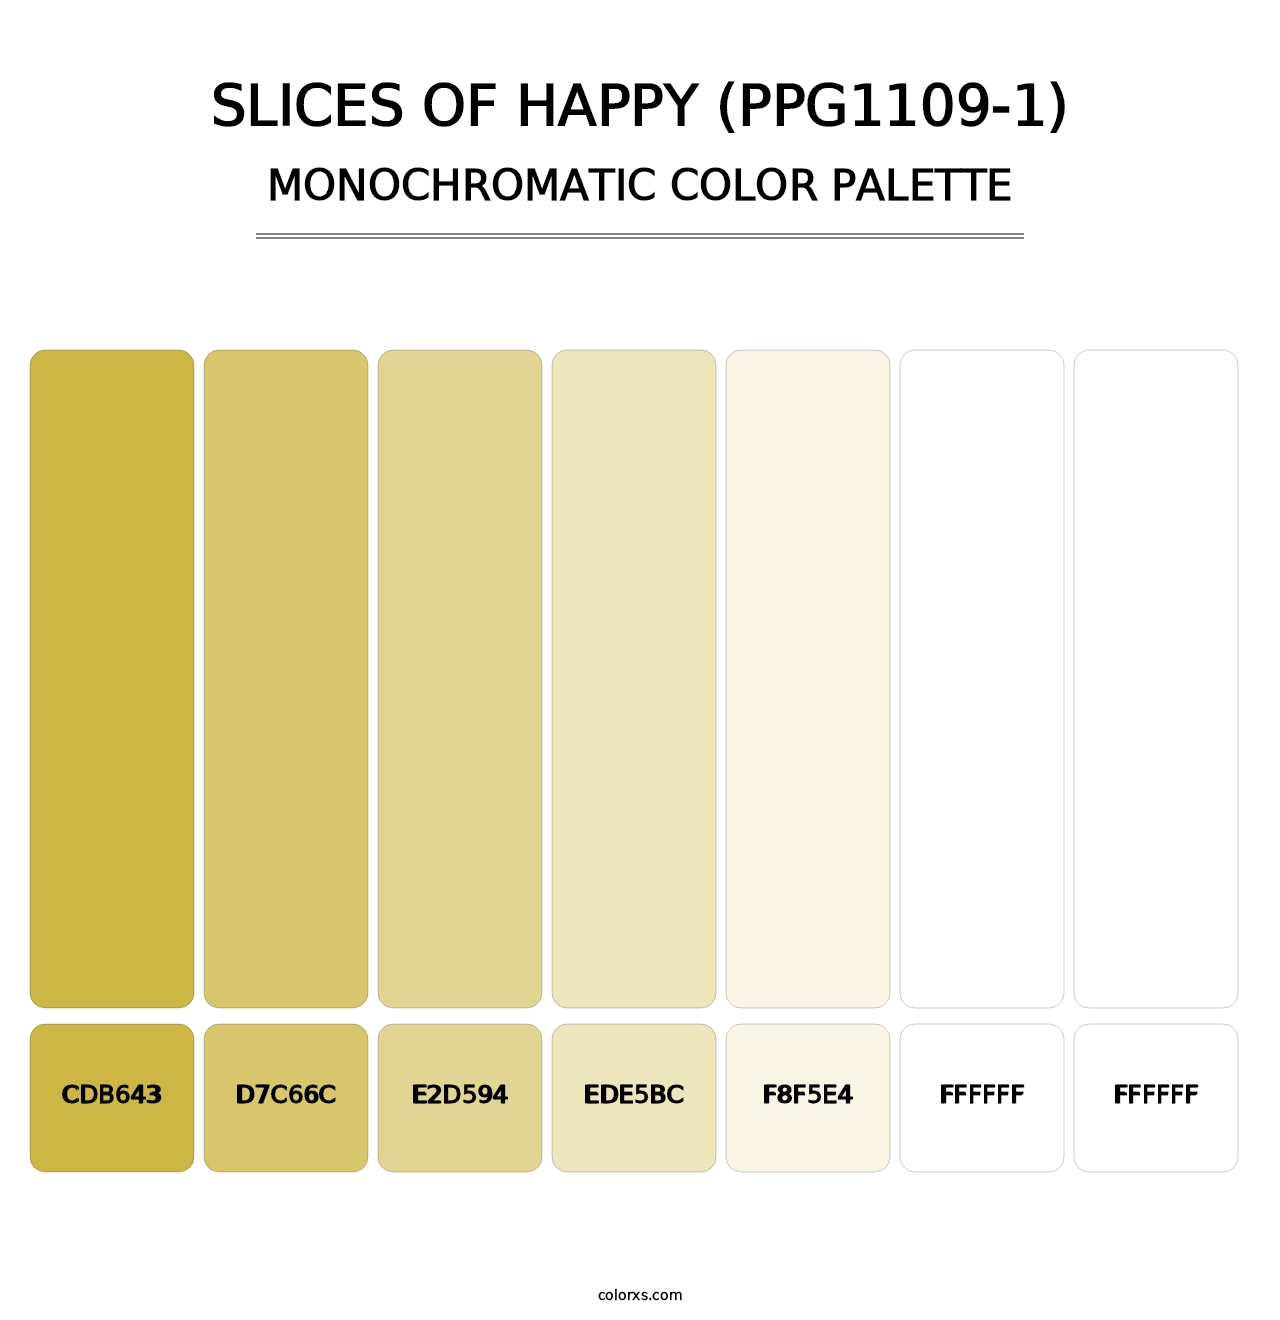 Slices Of Happy (PPG1109-1) - Monochromatic Color Palette